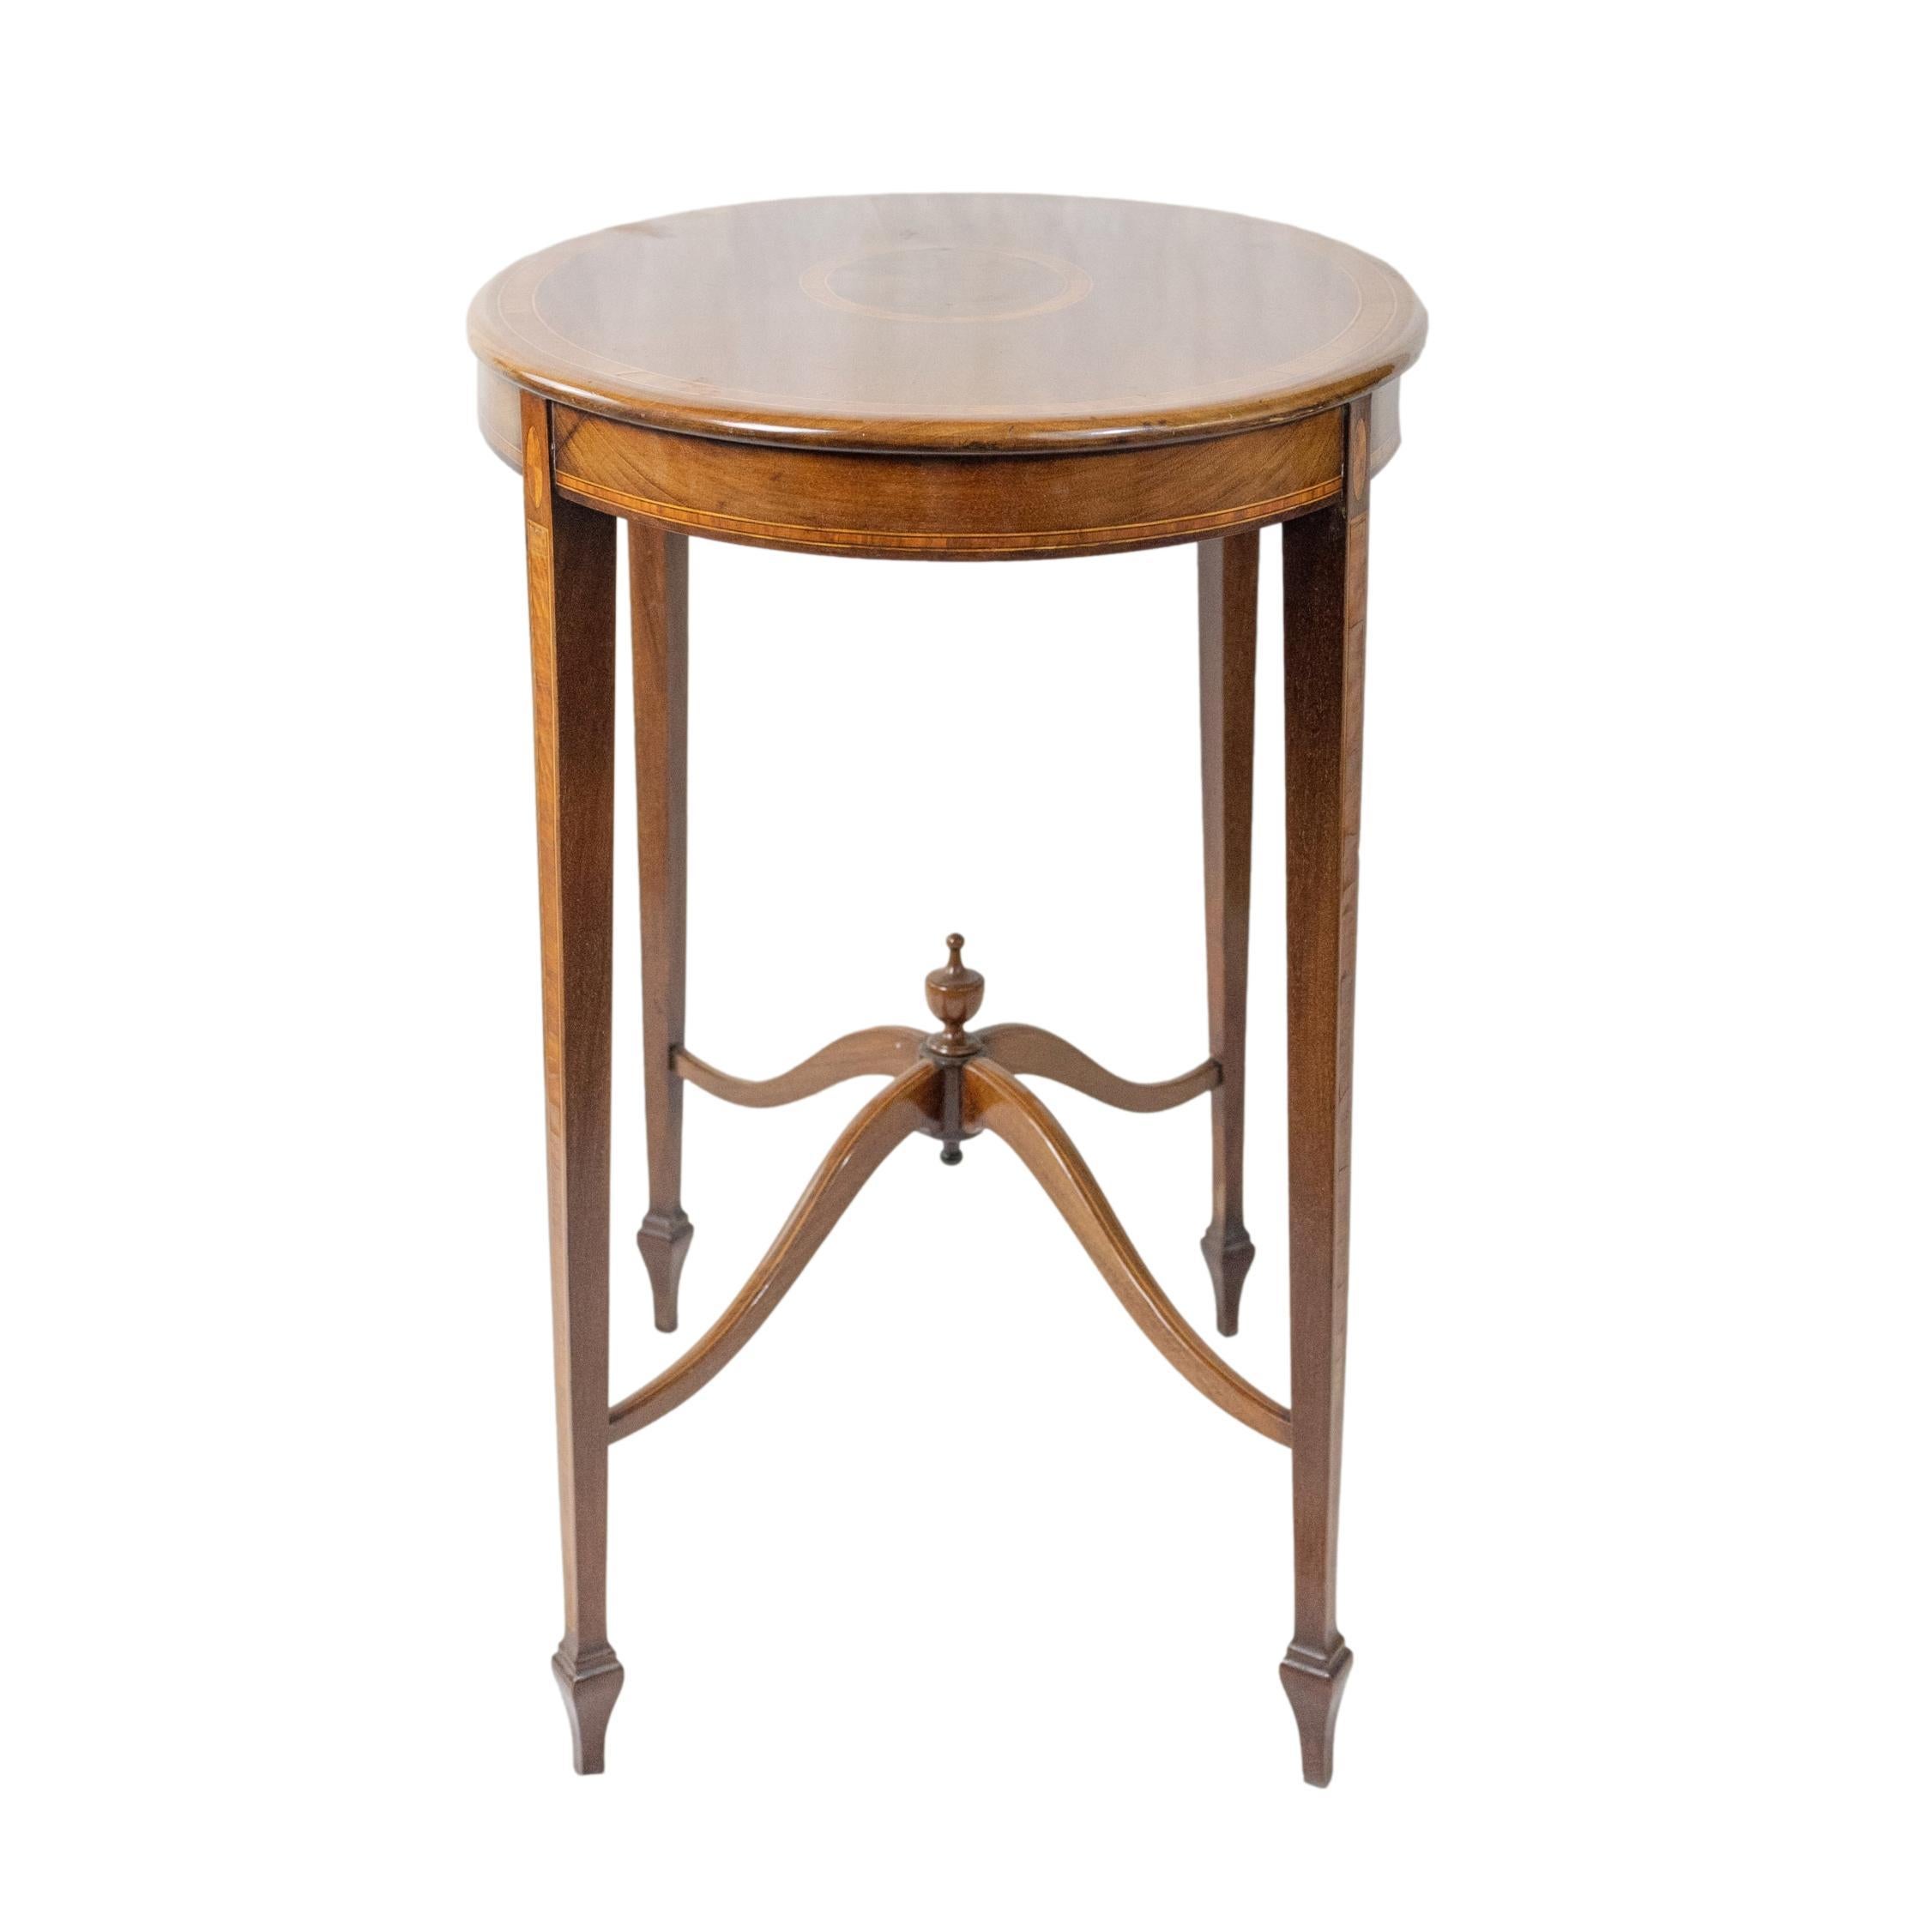 19th Century Figured Mahogany and Satinwood-Inlaid Oval Occasional Table, English, ca. 1890 For Sale